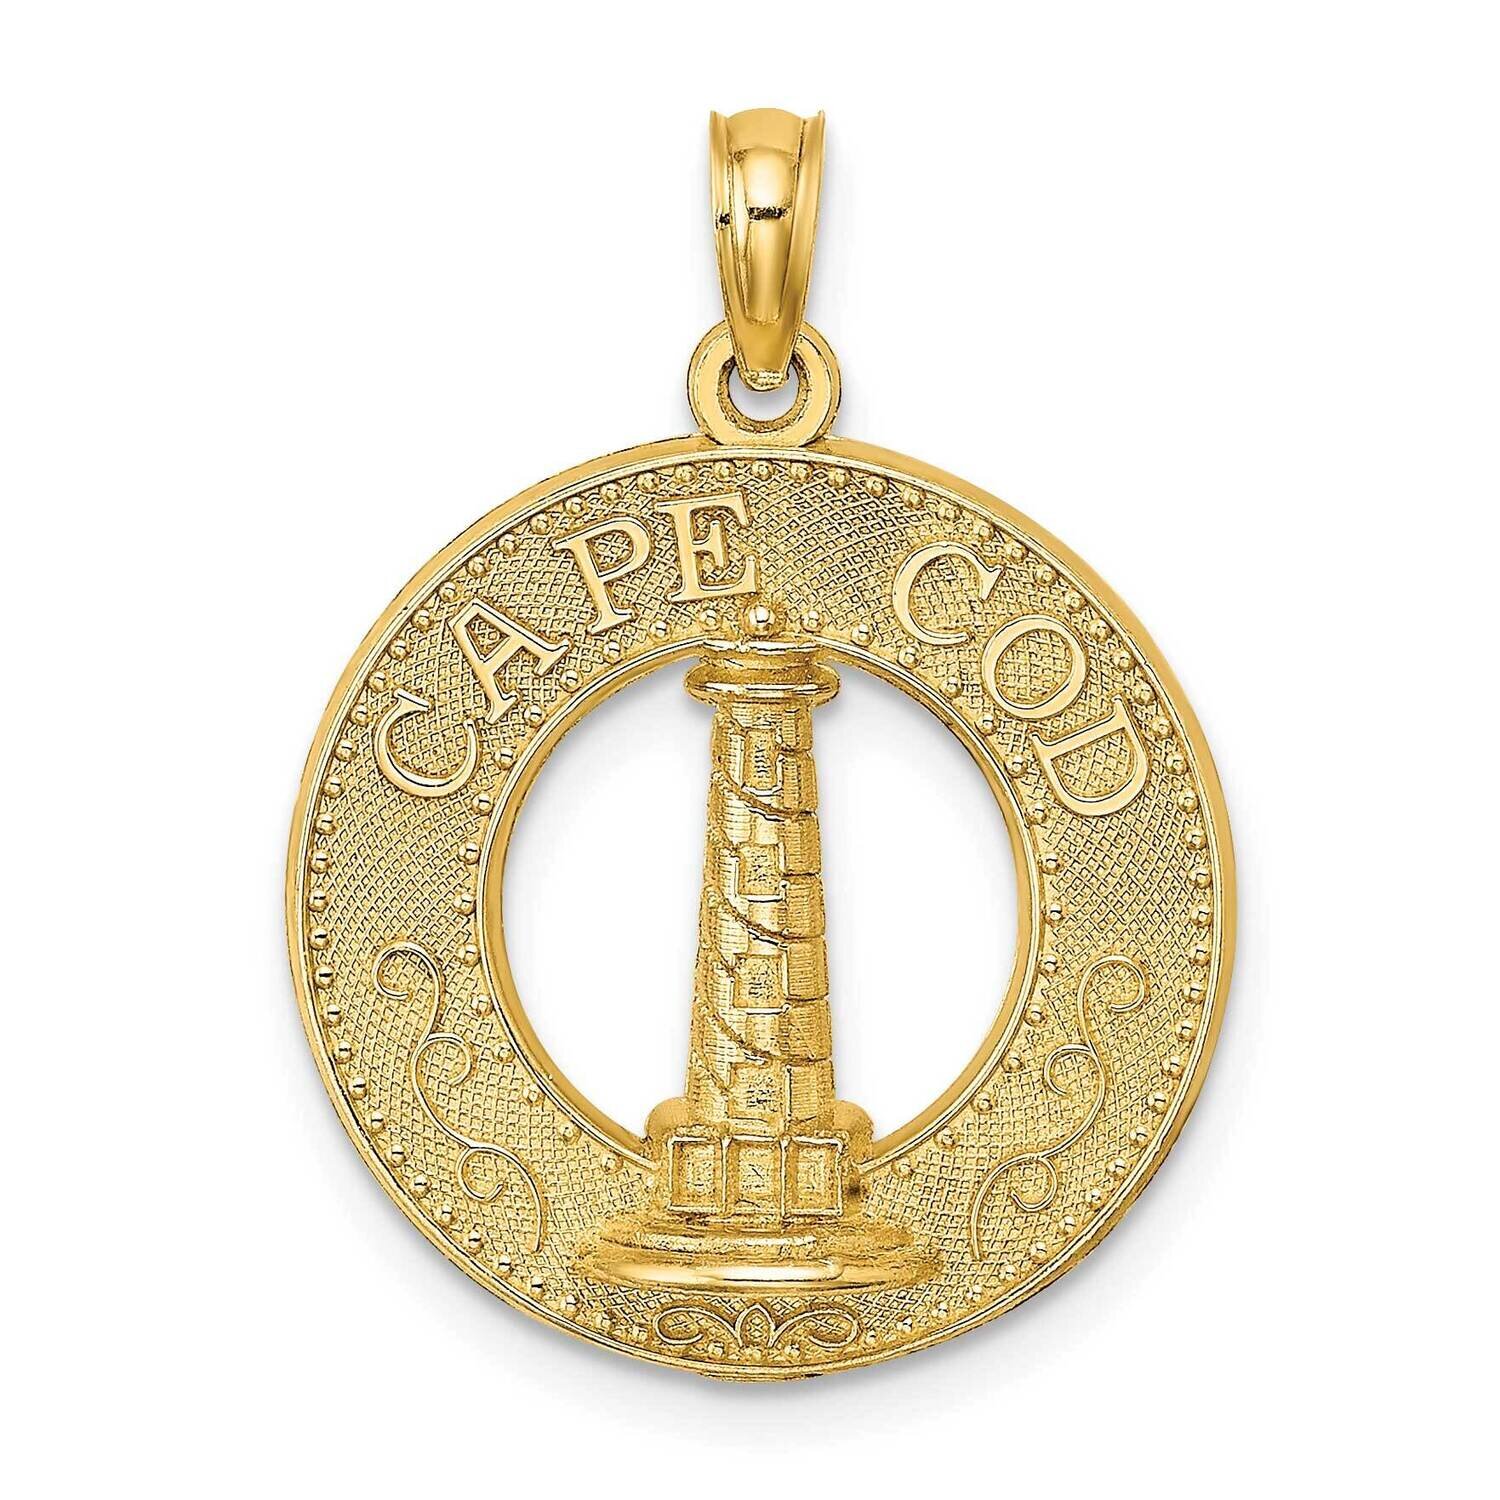 Cape Cod Round Frame with Lighthouse Charm 14k Gold K8237